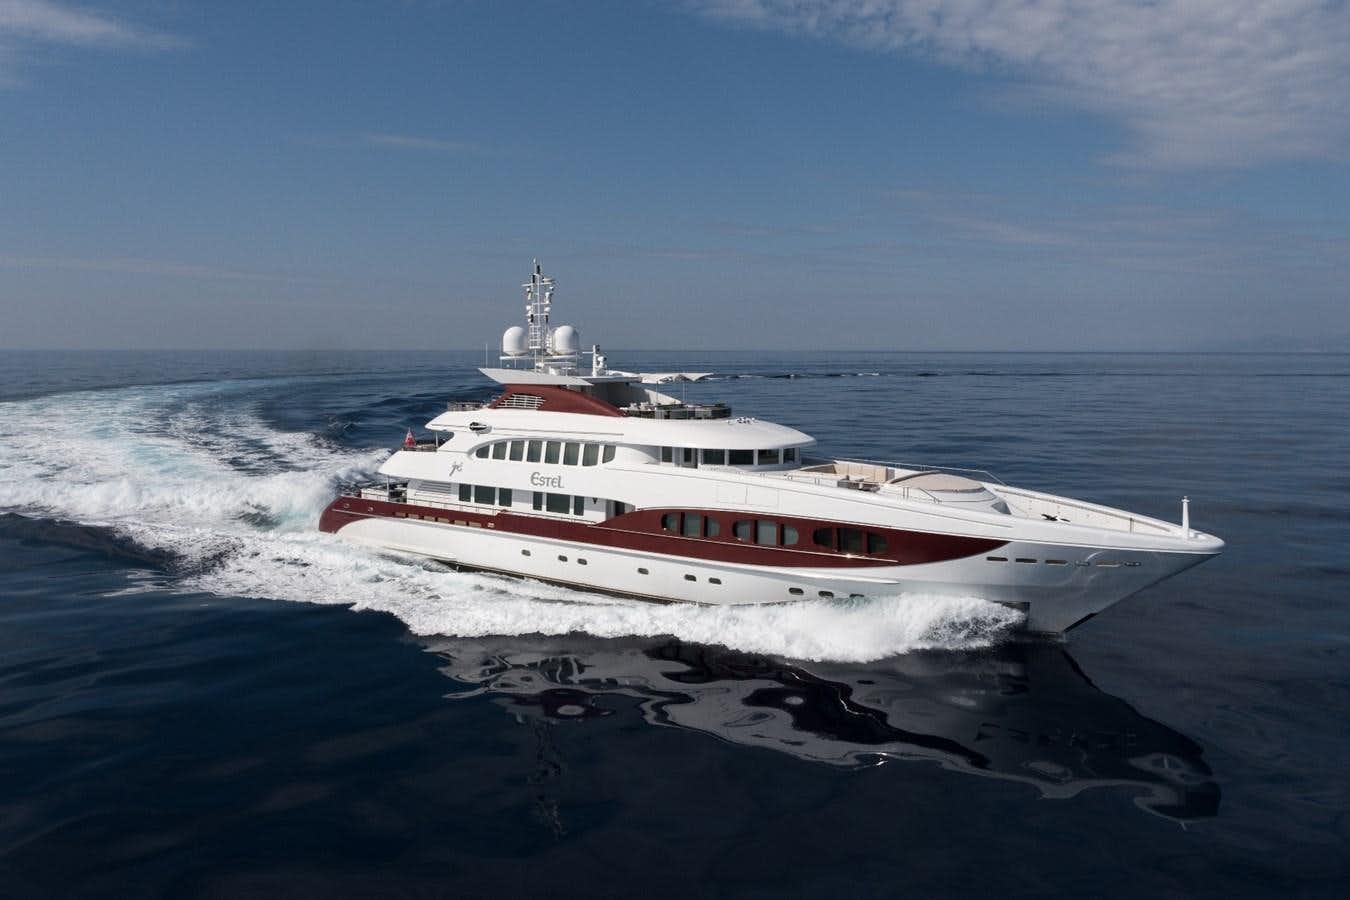 Watch Video for IDEFIX II Yacht for Charter